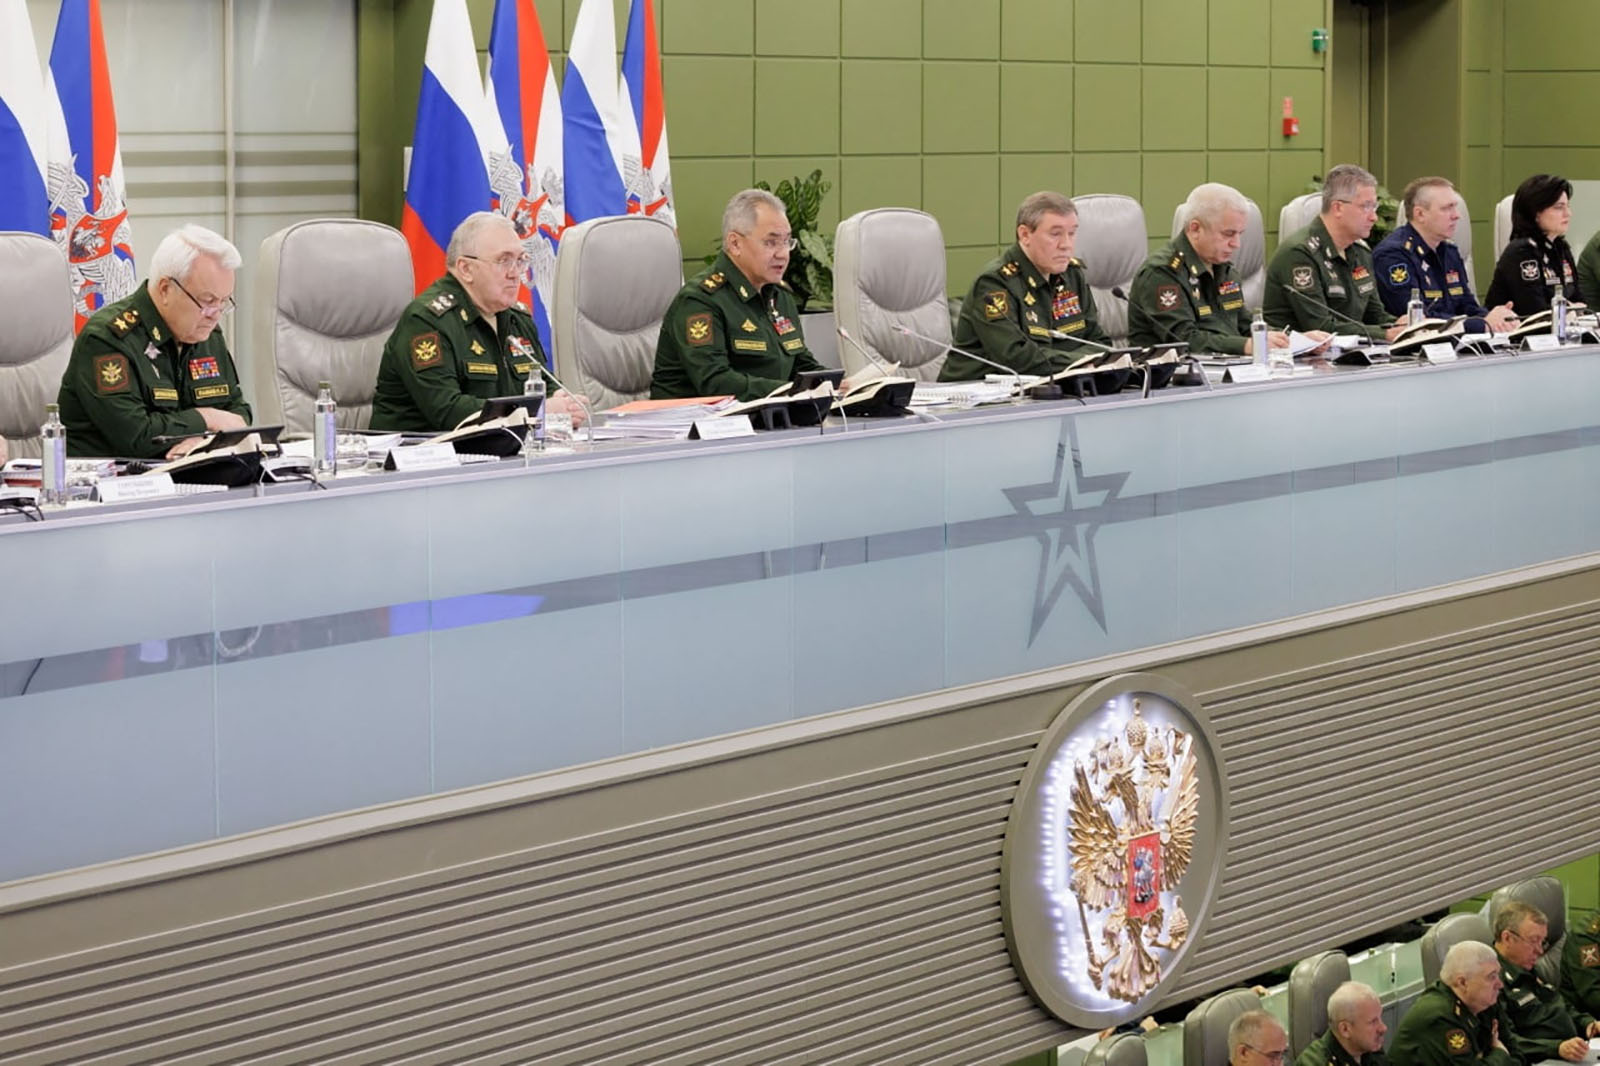 Russian Defence Minister Sergei Shoigu chairs a meeting at the National Defence Control Centre in Moscow, Russia, on November 1.